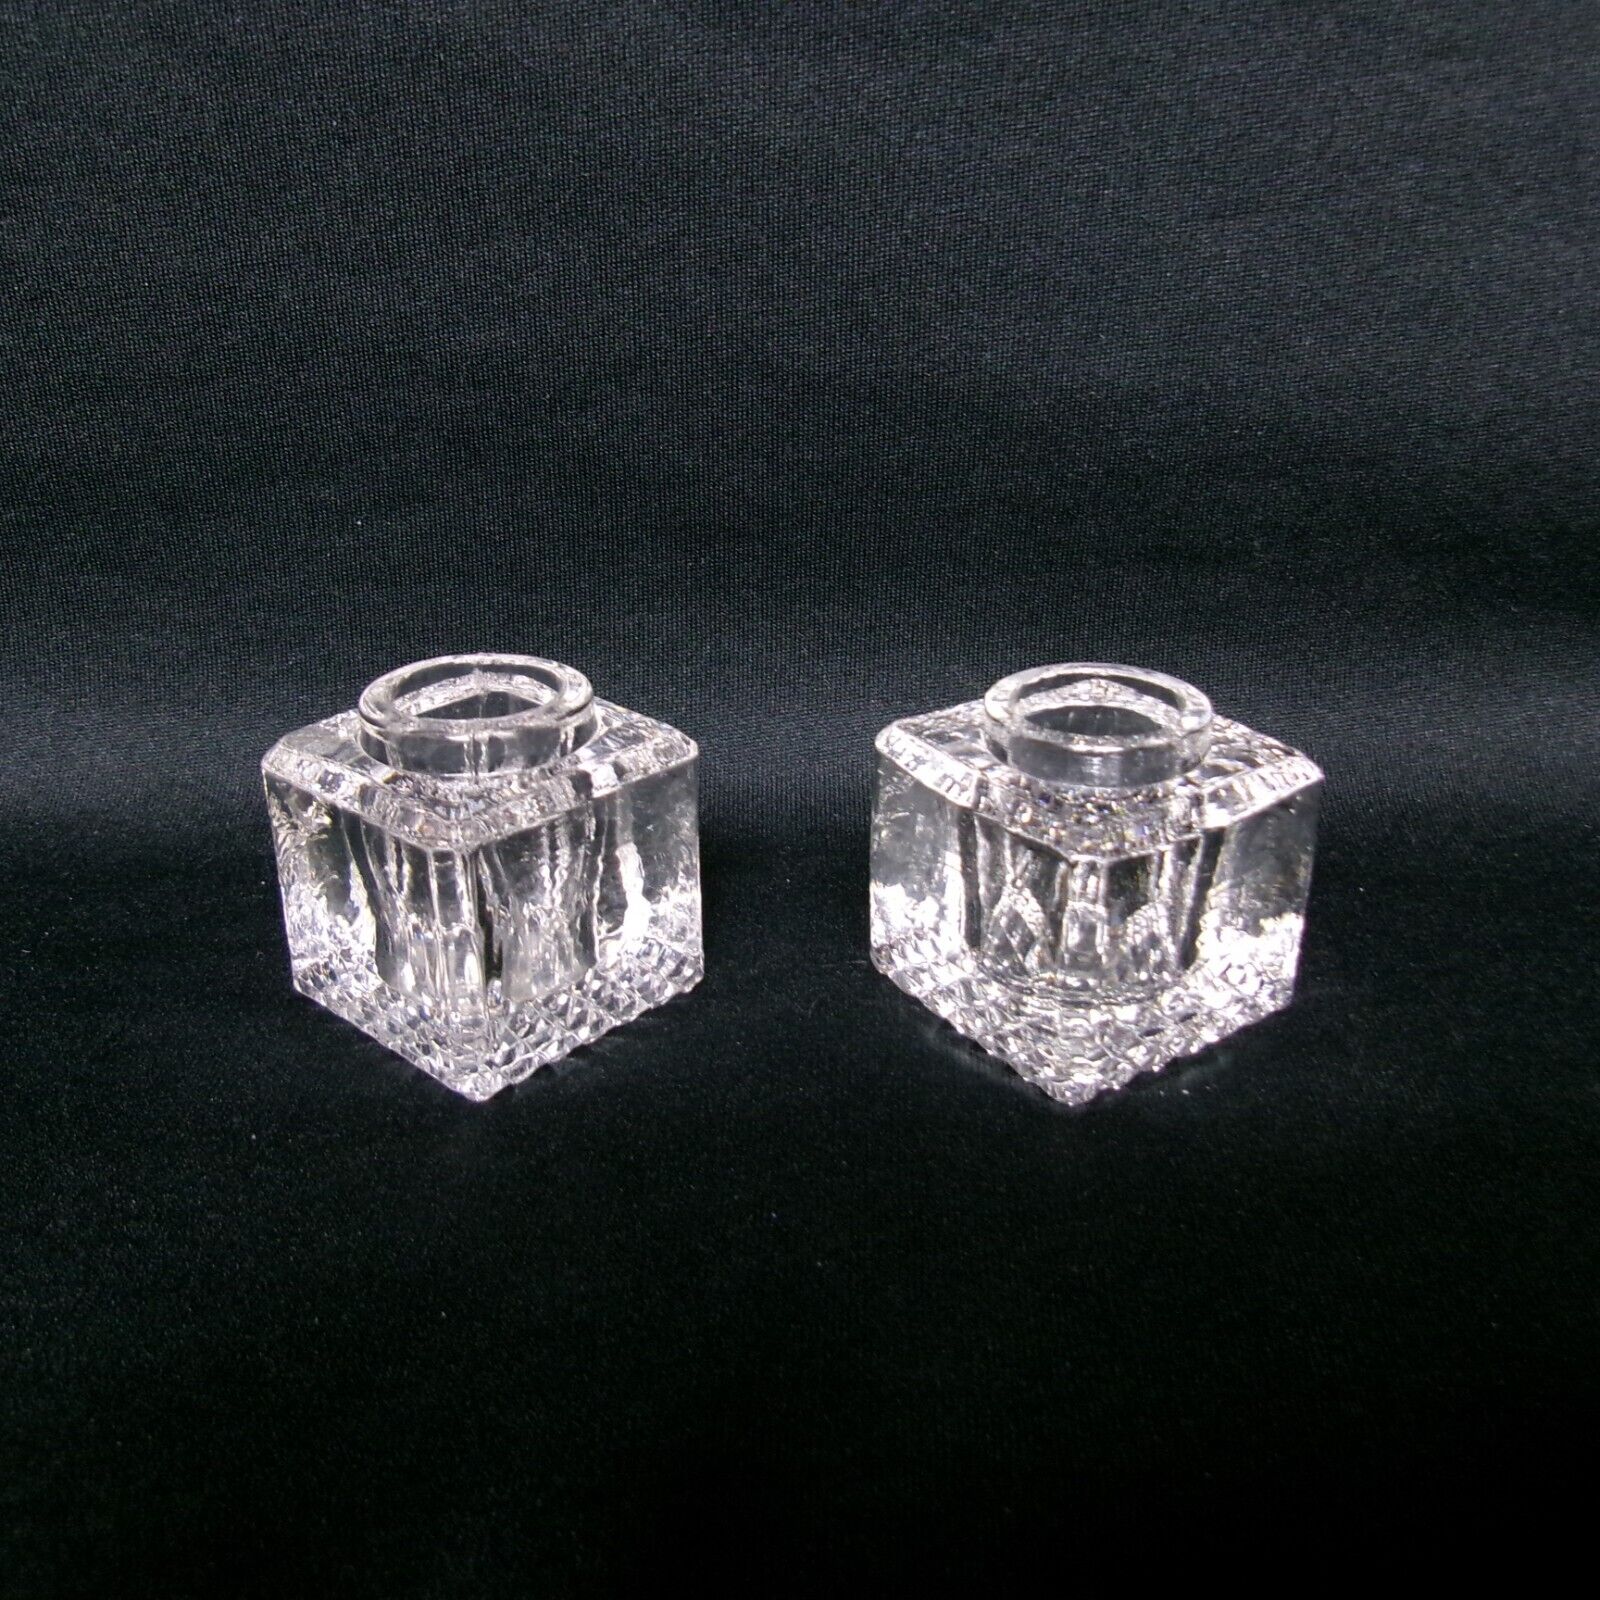 Set/2 - Wonderful Antique Vintage Small Square Sparkling Clear Glass Inkwells